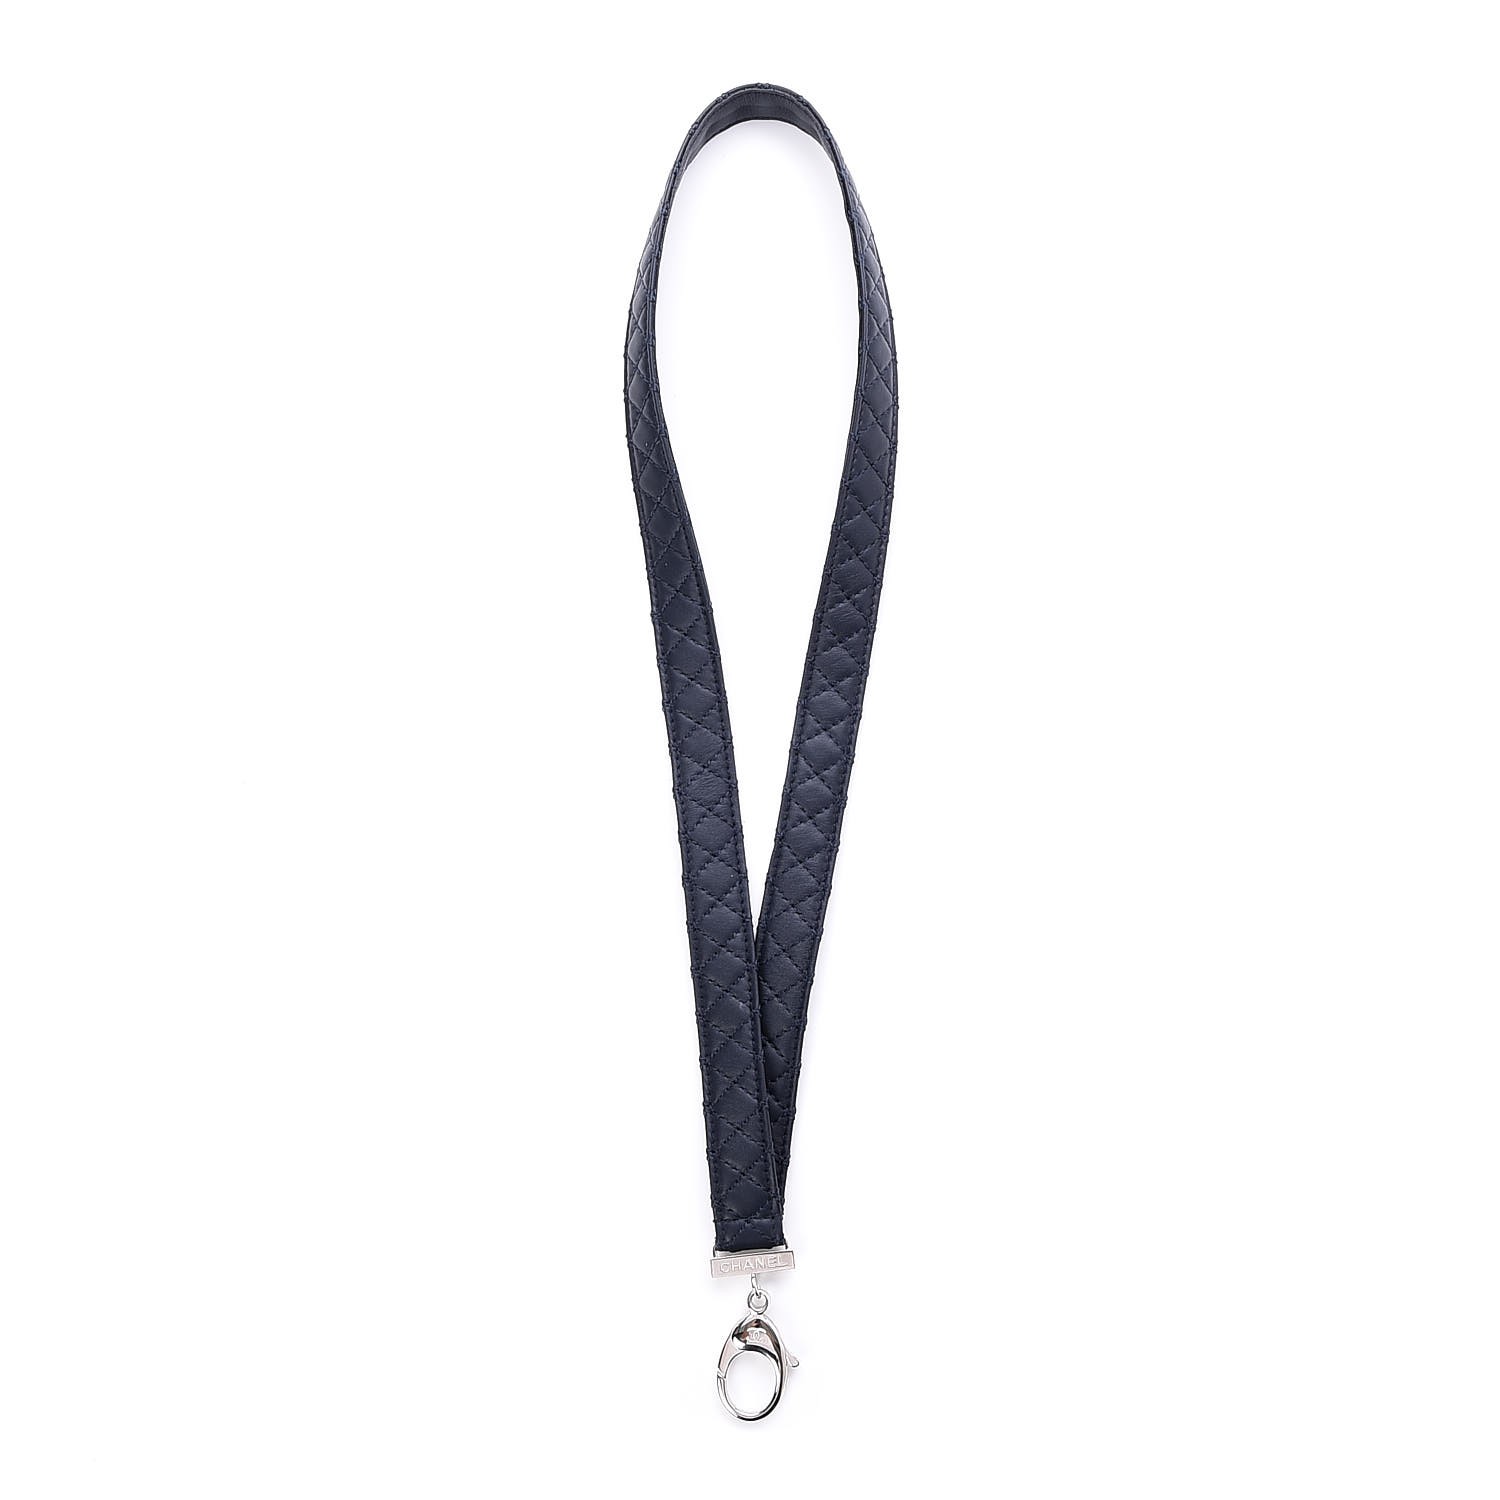 CHANEL Lambskin Quilted Lanyard Key Holder Necklace Navy 242502 ...